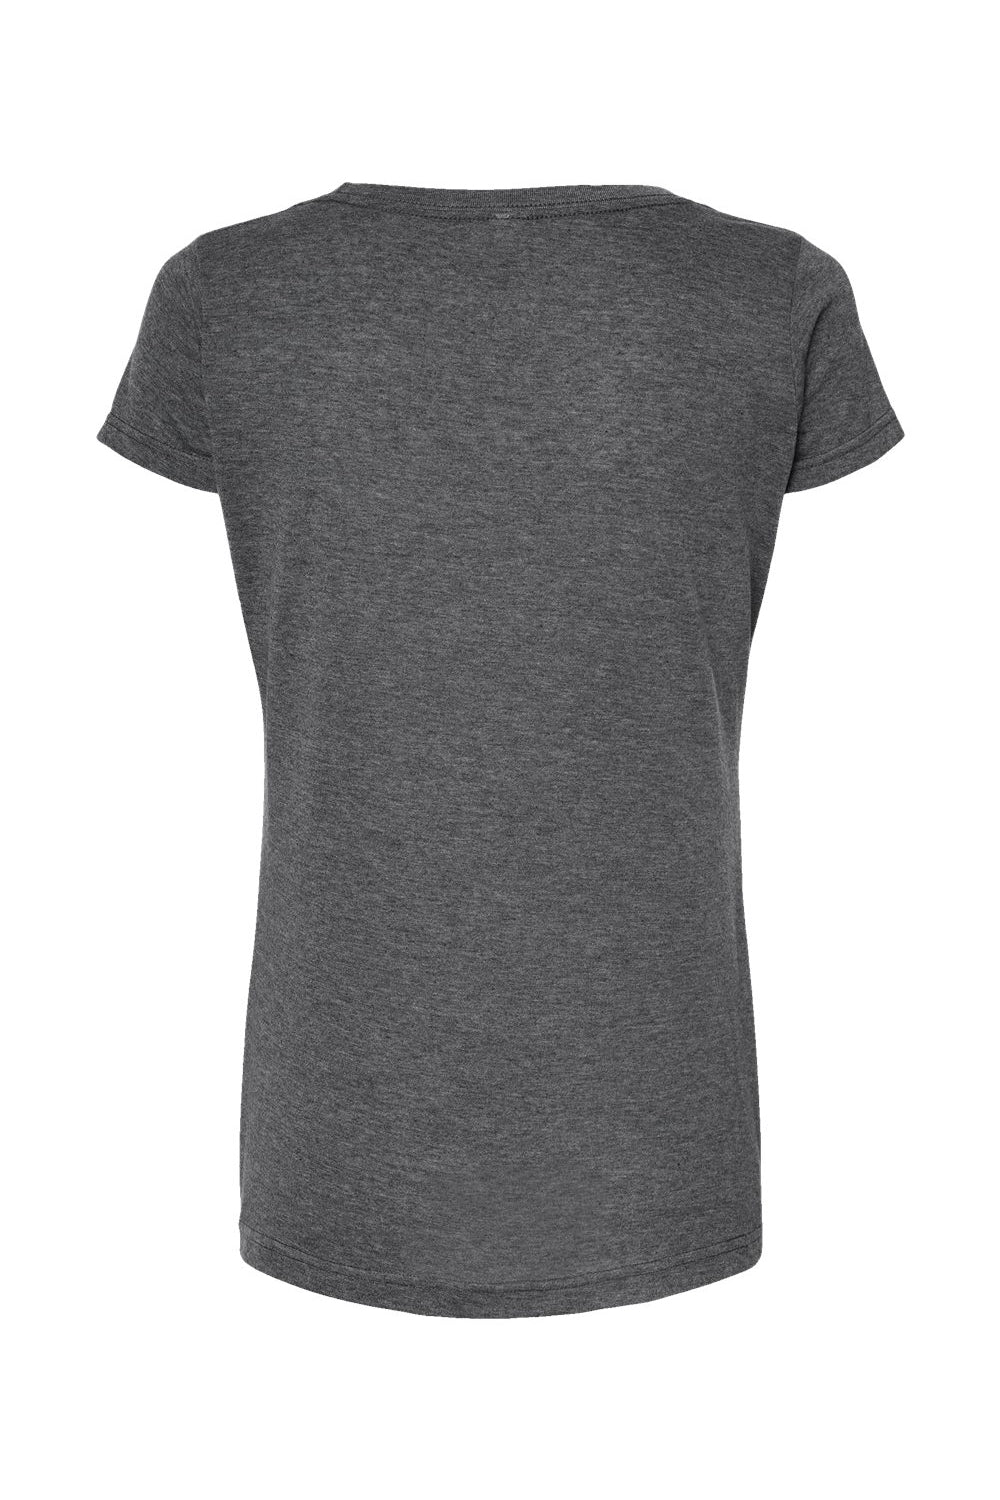 Tultex 243 Womens Poly-Rich Short Sleeve Scoop Neck T-Shirt Heather Charcoal Grey Flat Back